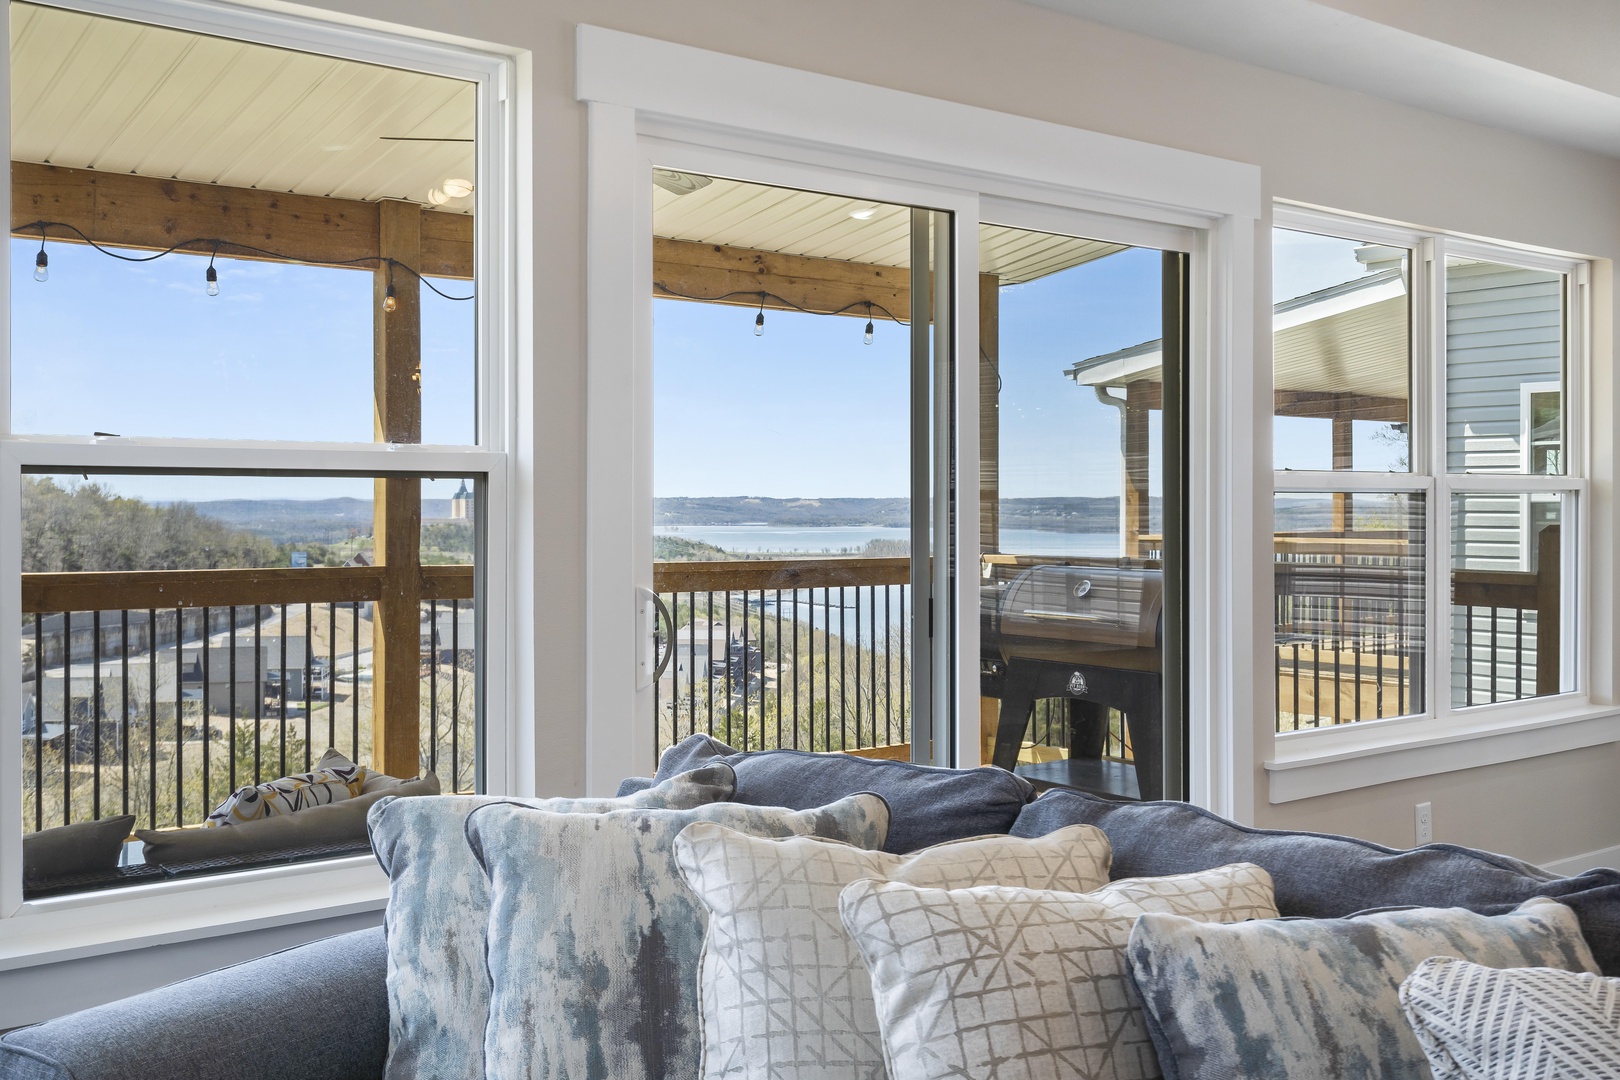 Open living space, with with Smart TV, ample seating, deck access, and beautiful lake views